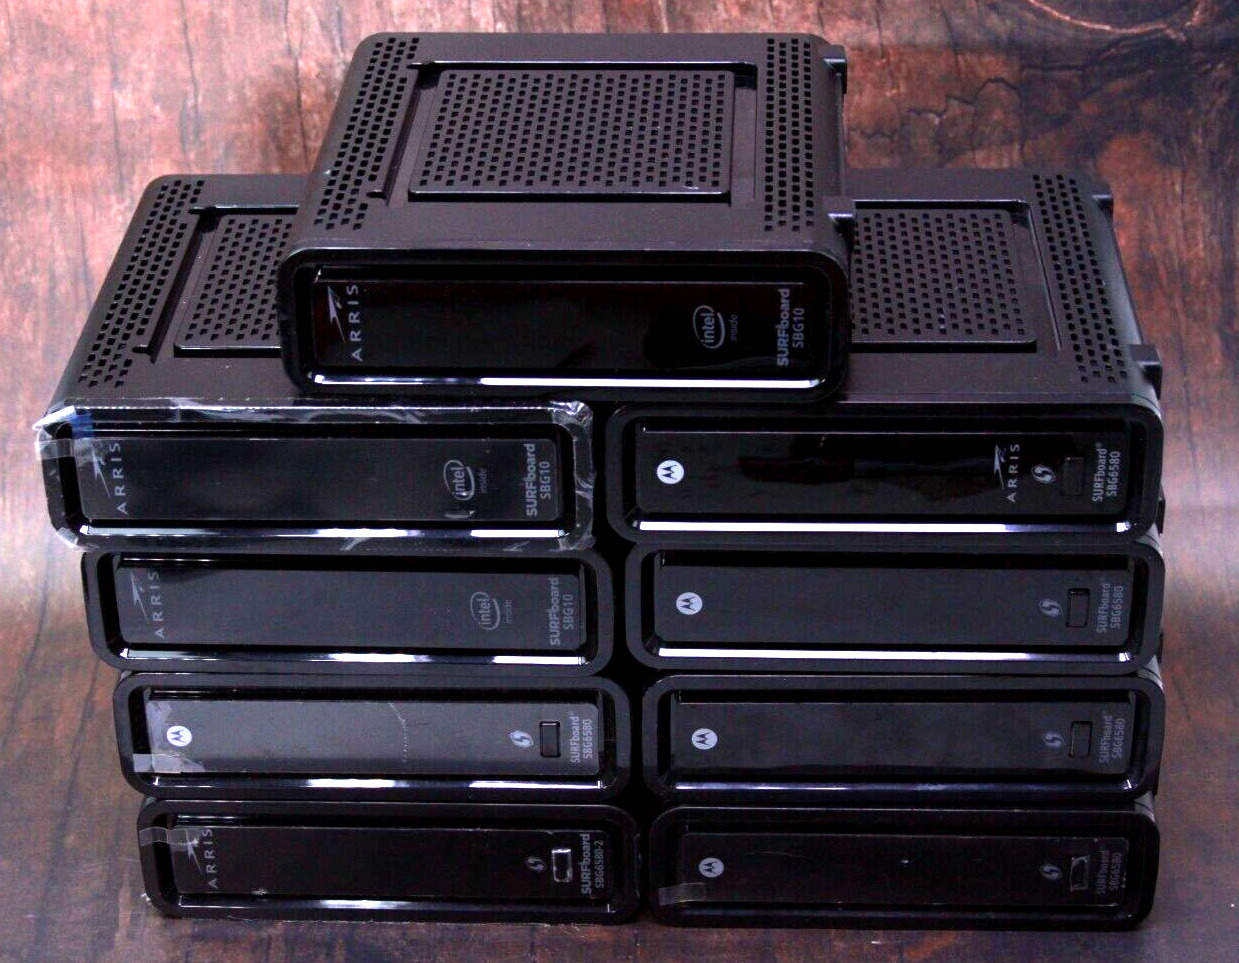 LOT OF 9 ARRIS SURFboard SBG6580-G228 SBG6580 & SBG10 Cable Modem Wi-Fi Router